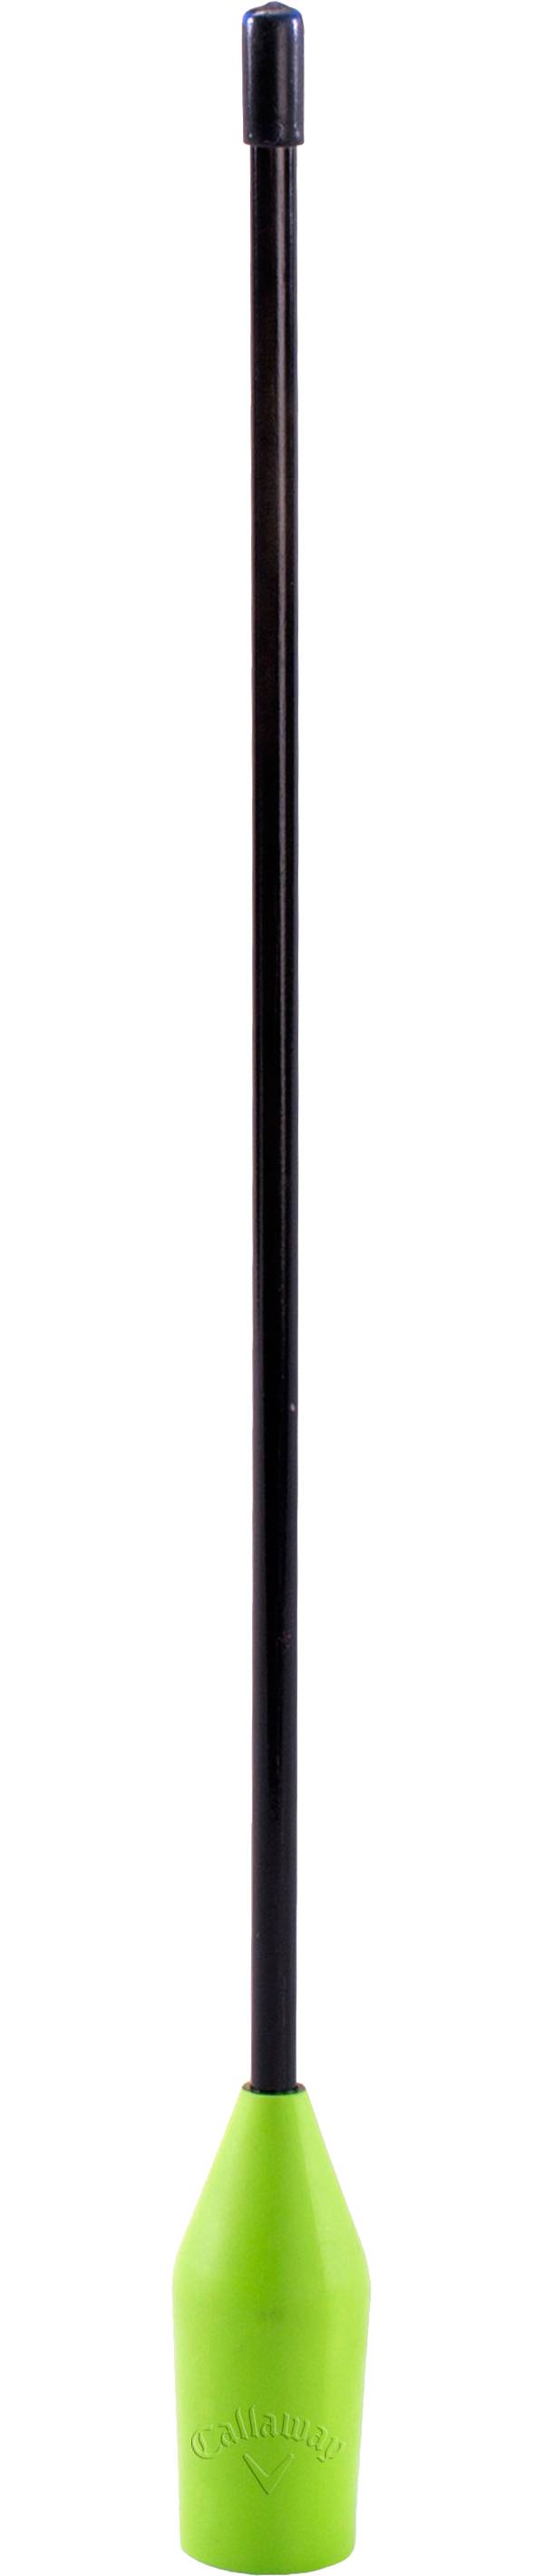 Callaway Chip Stix Training Aid product image